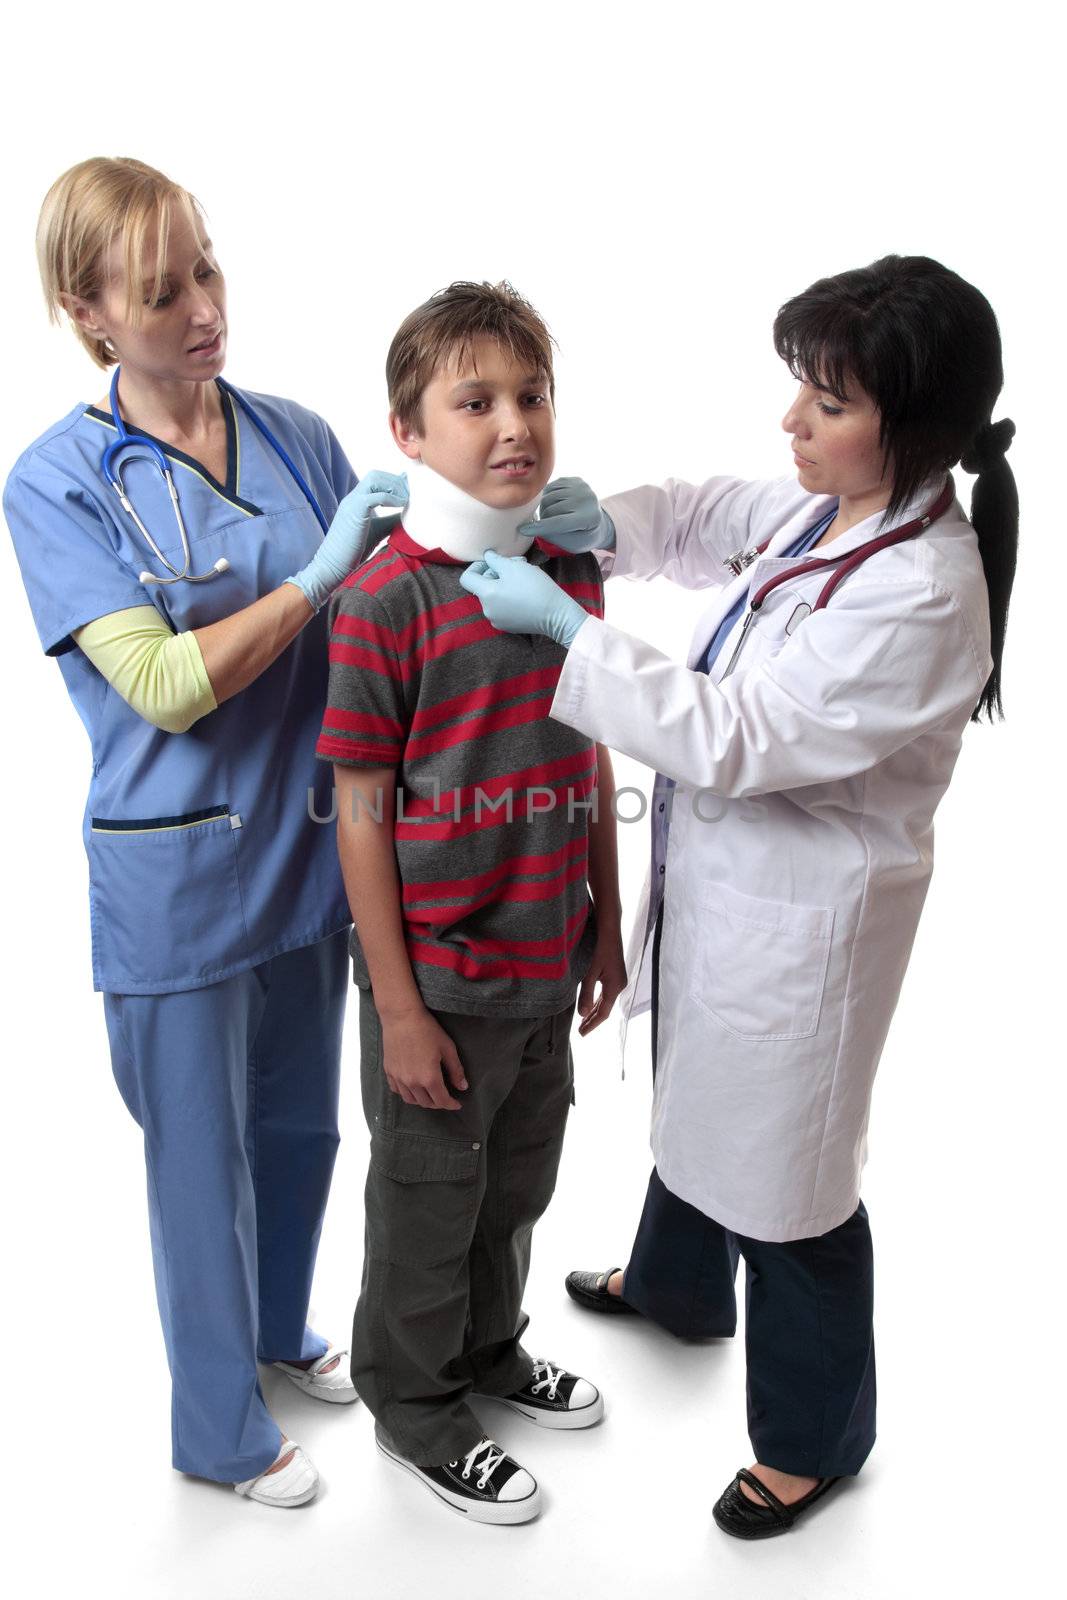 Medical staff place a neck brace on an injured boy.  Neck braces  immobilize and support the spine when there is a condition that needs to be treated.